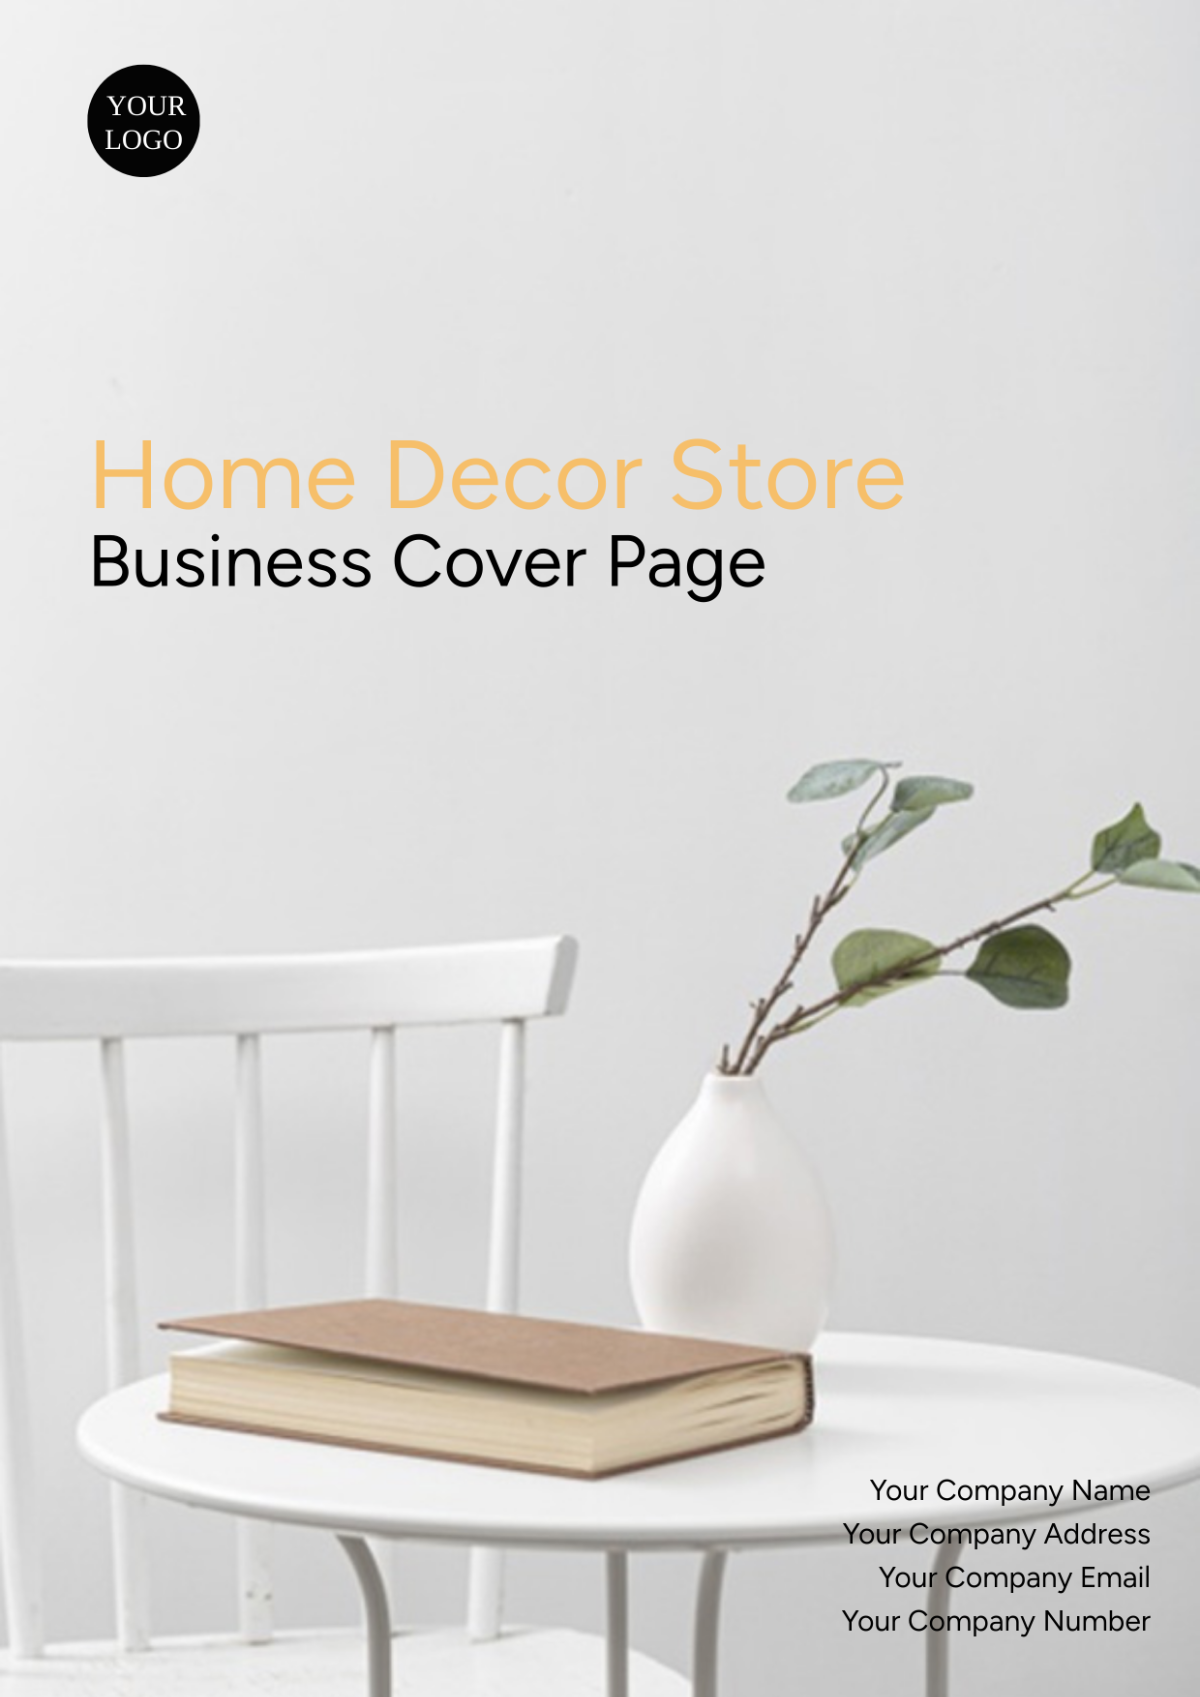 Home Decor Store Business Cover Page